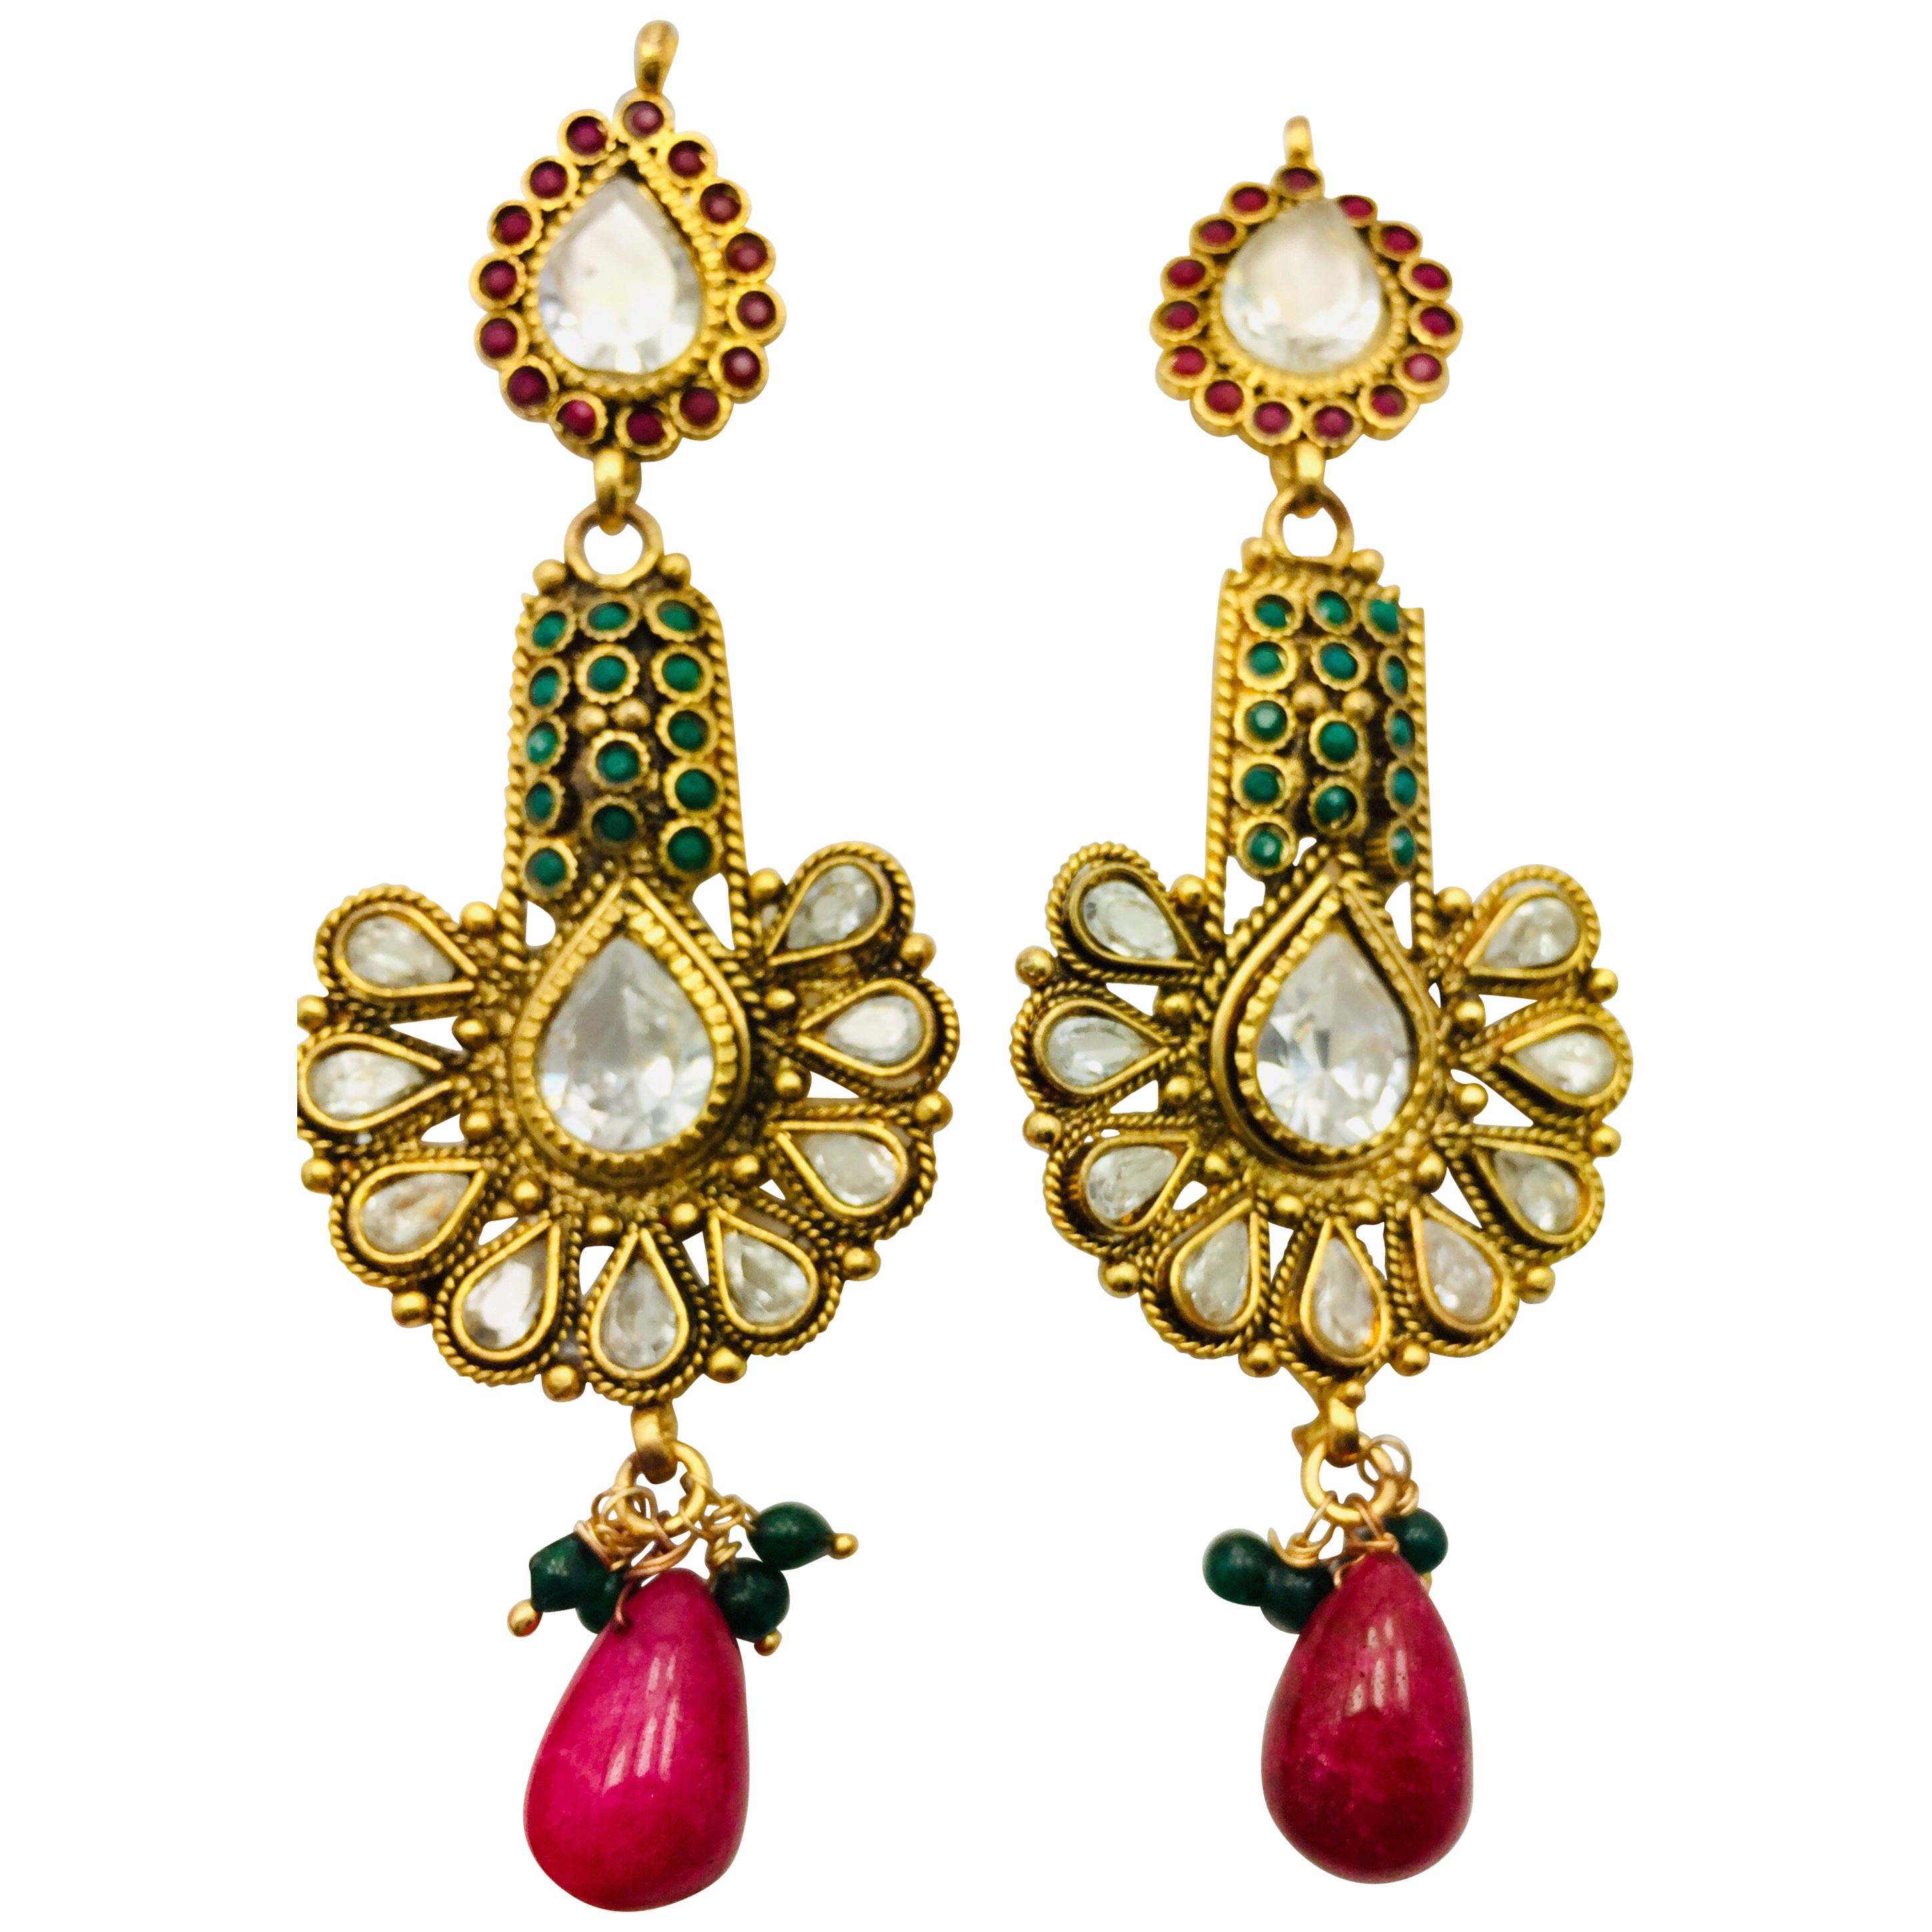 Antique Style Green and Faux Ruby Earrings